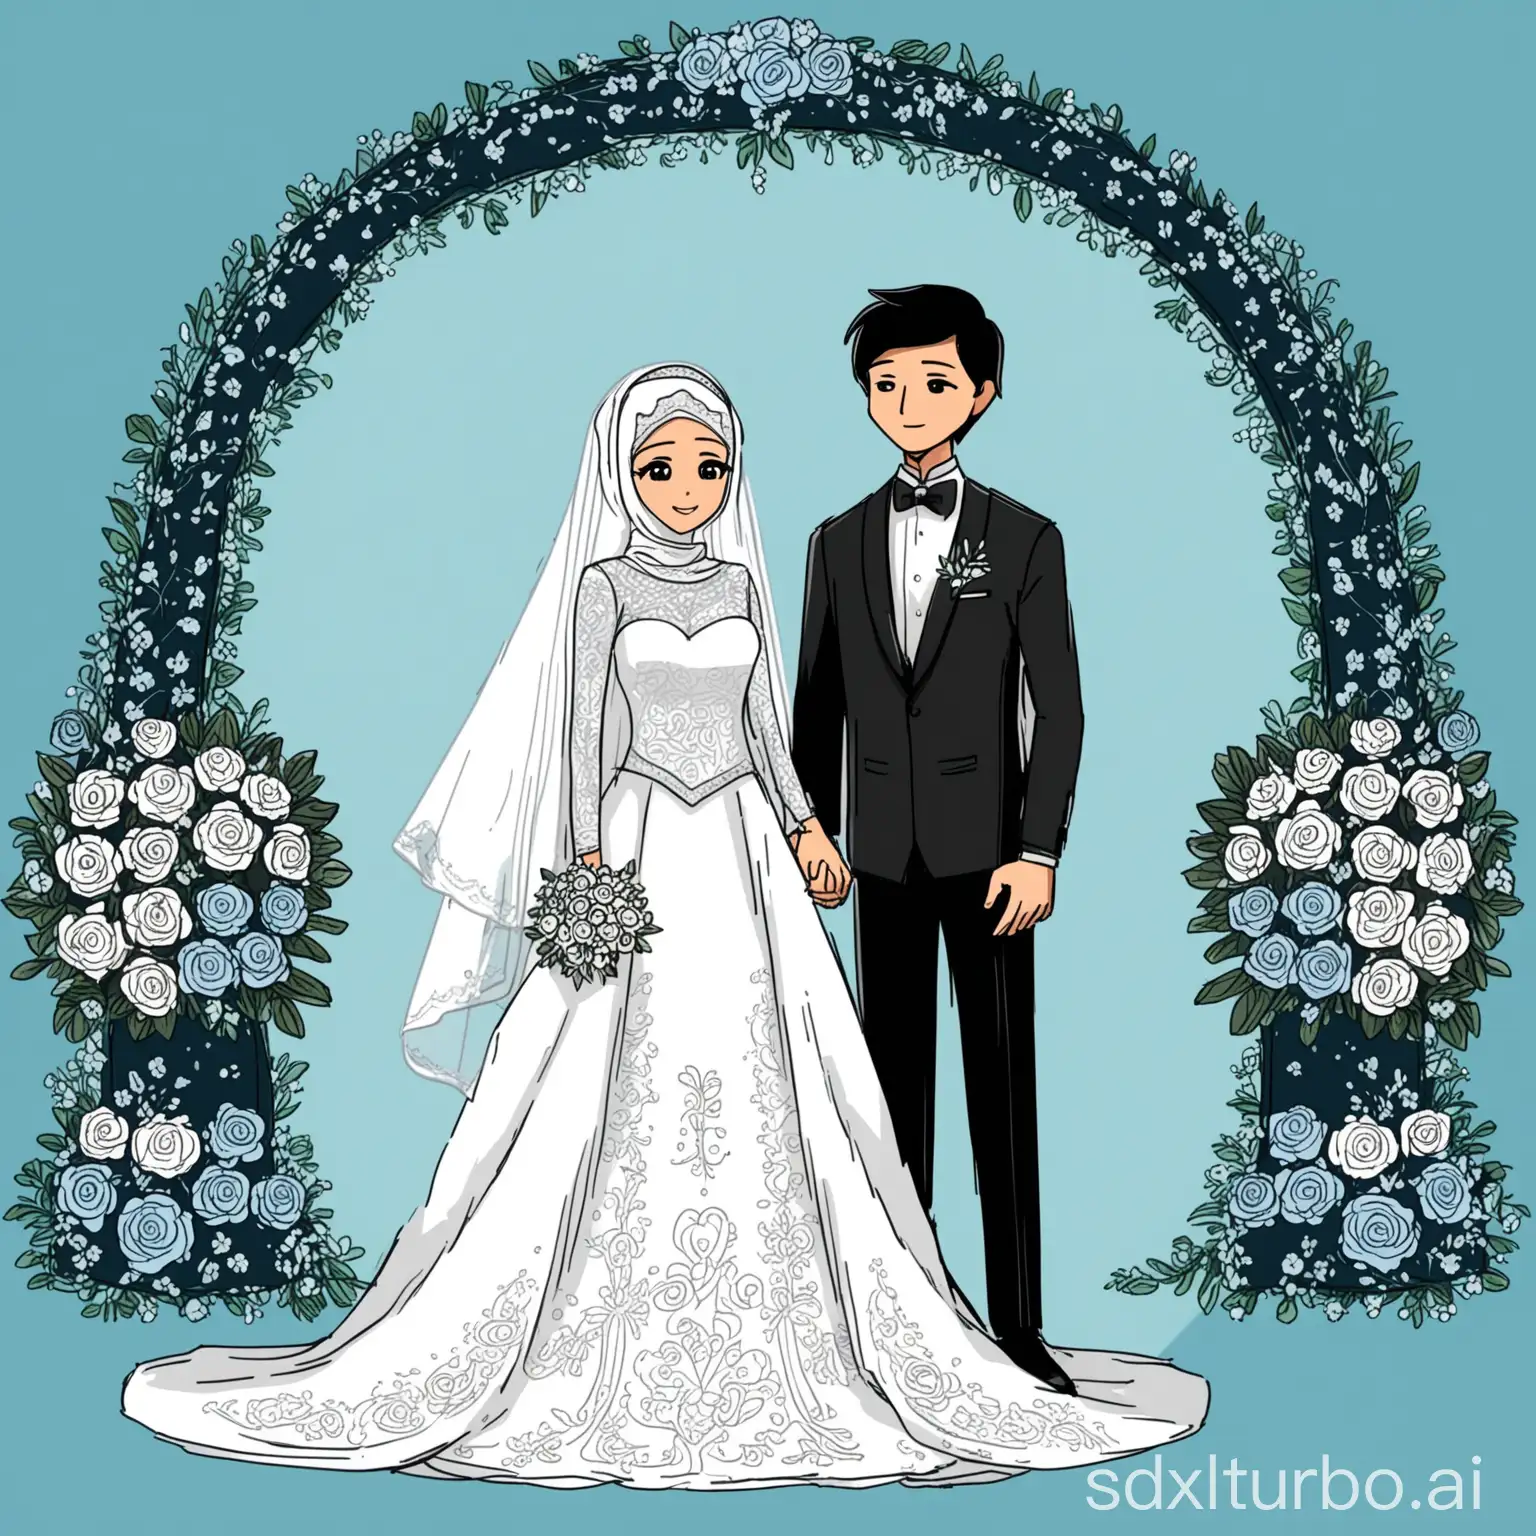 A hand-drawn animation style depiction of a wedding ceremony. The bride, with her flowing, Wearing a hijab, dressed in a traditional white wedding gown embroidered with intricate lace details. The gown has a full skirt, a fitted bodice, and a long veil. The groom, an East Asian man, is wearing a classic black tuxedo paired with a white shirt and a black bow tie. He has short black hair, styled neatly. The background is blue wedding decor, Without anyone behind the couple. Creat full body images